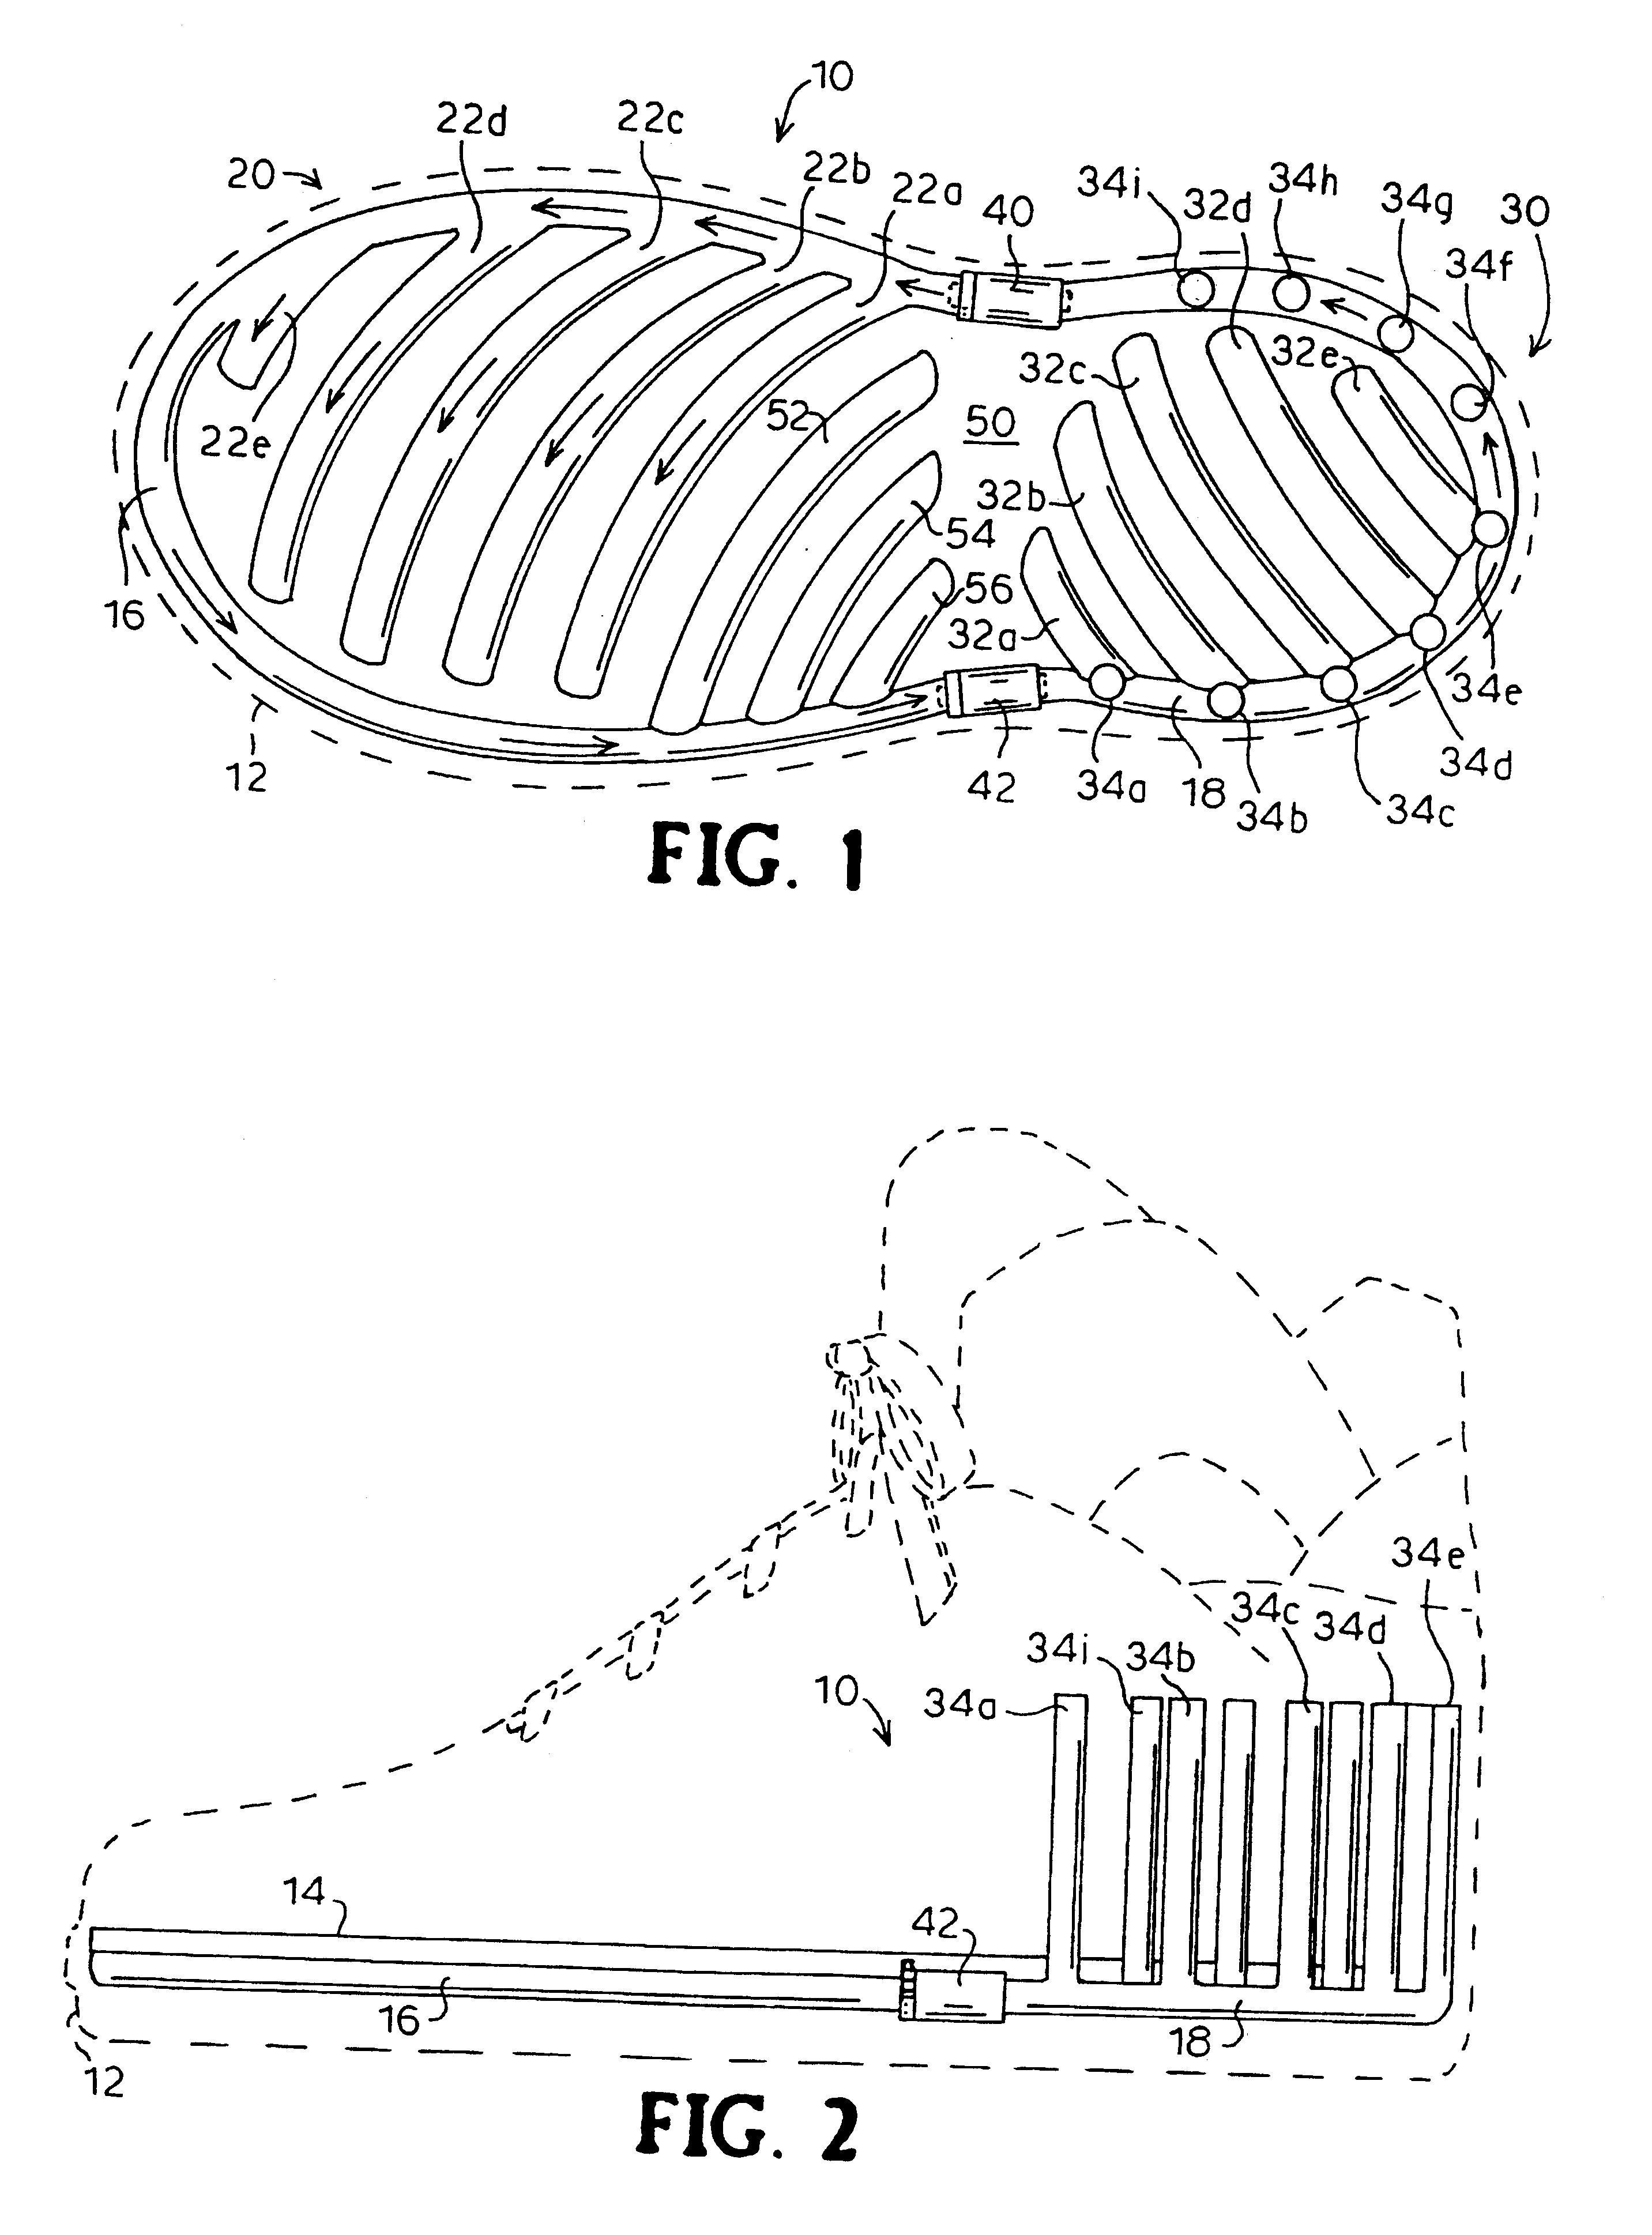 Method of controlling fluid flow transfer in shoes